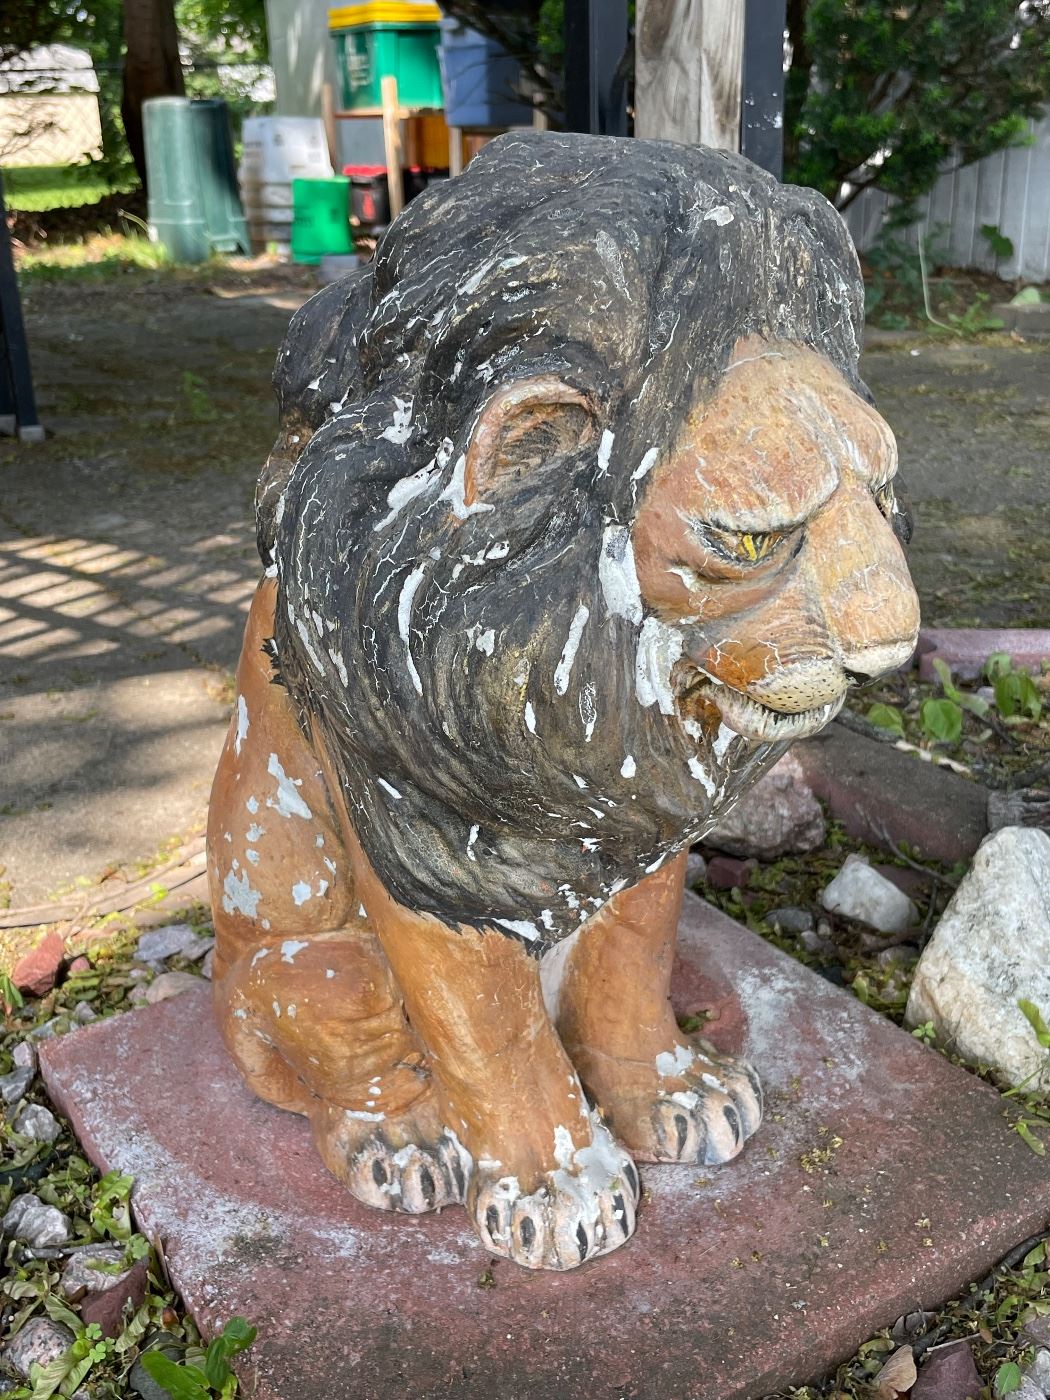 Cement lion for your front yard to scare away unwanted people/animals